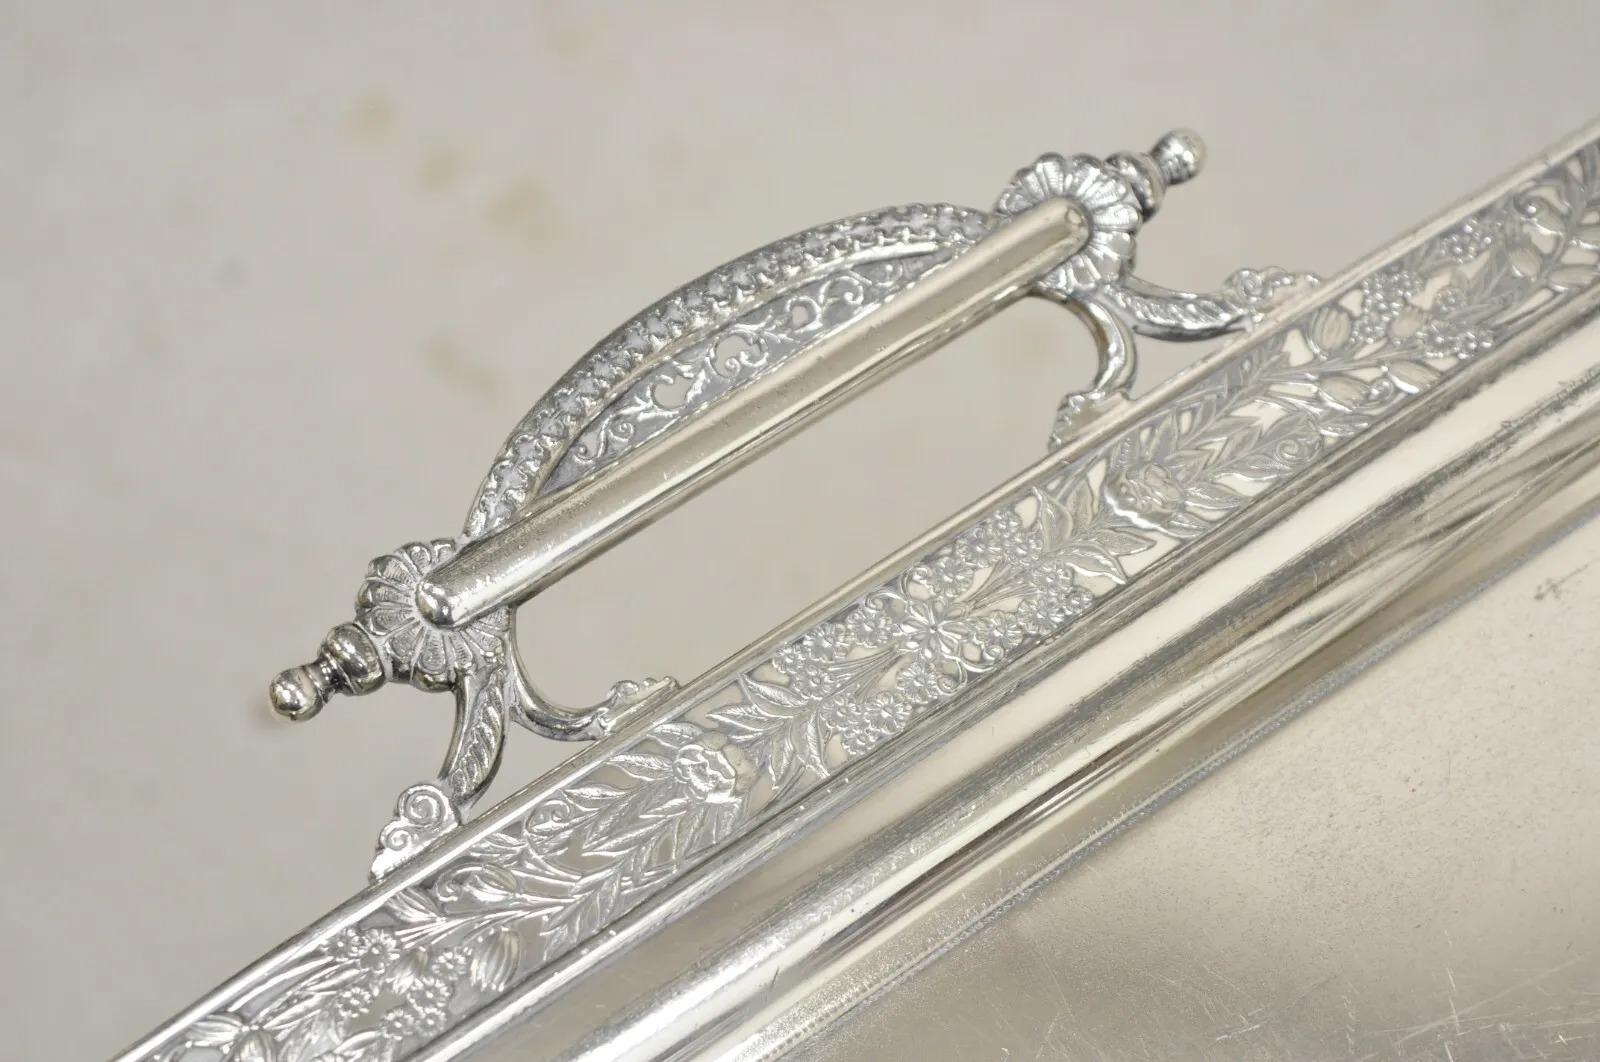 Antique Wilcox Victorian Aesthetic Movement Silver Plated Serving Platter Tray For Sale 2